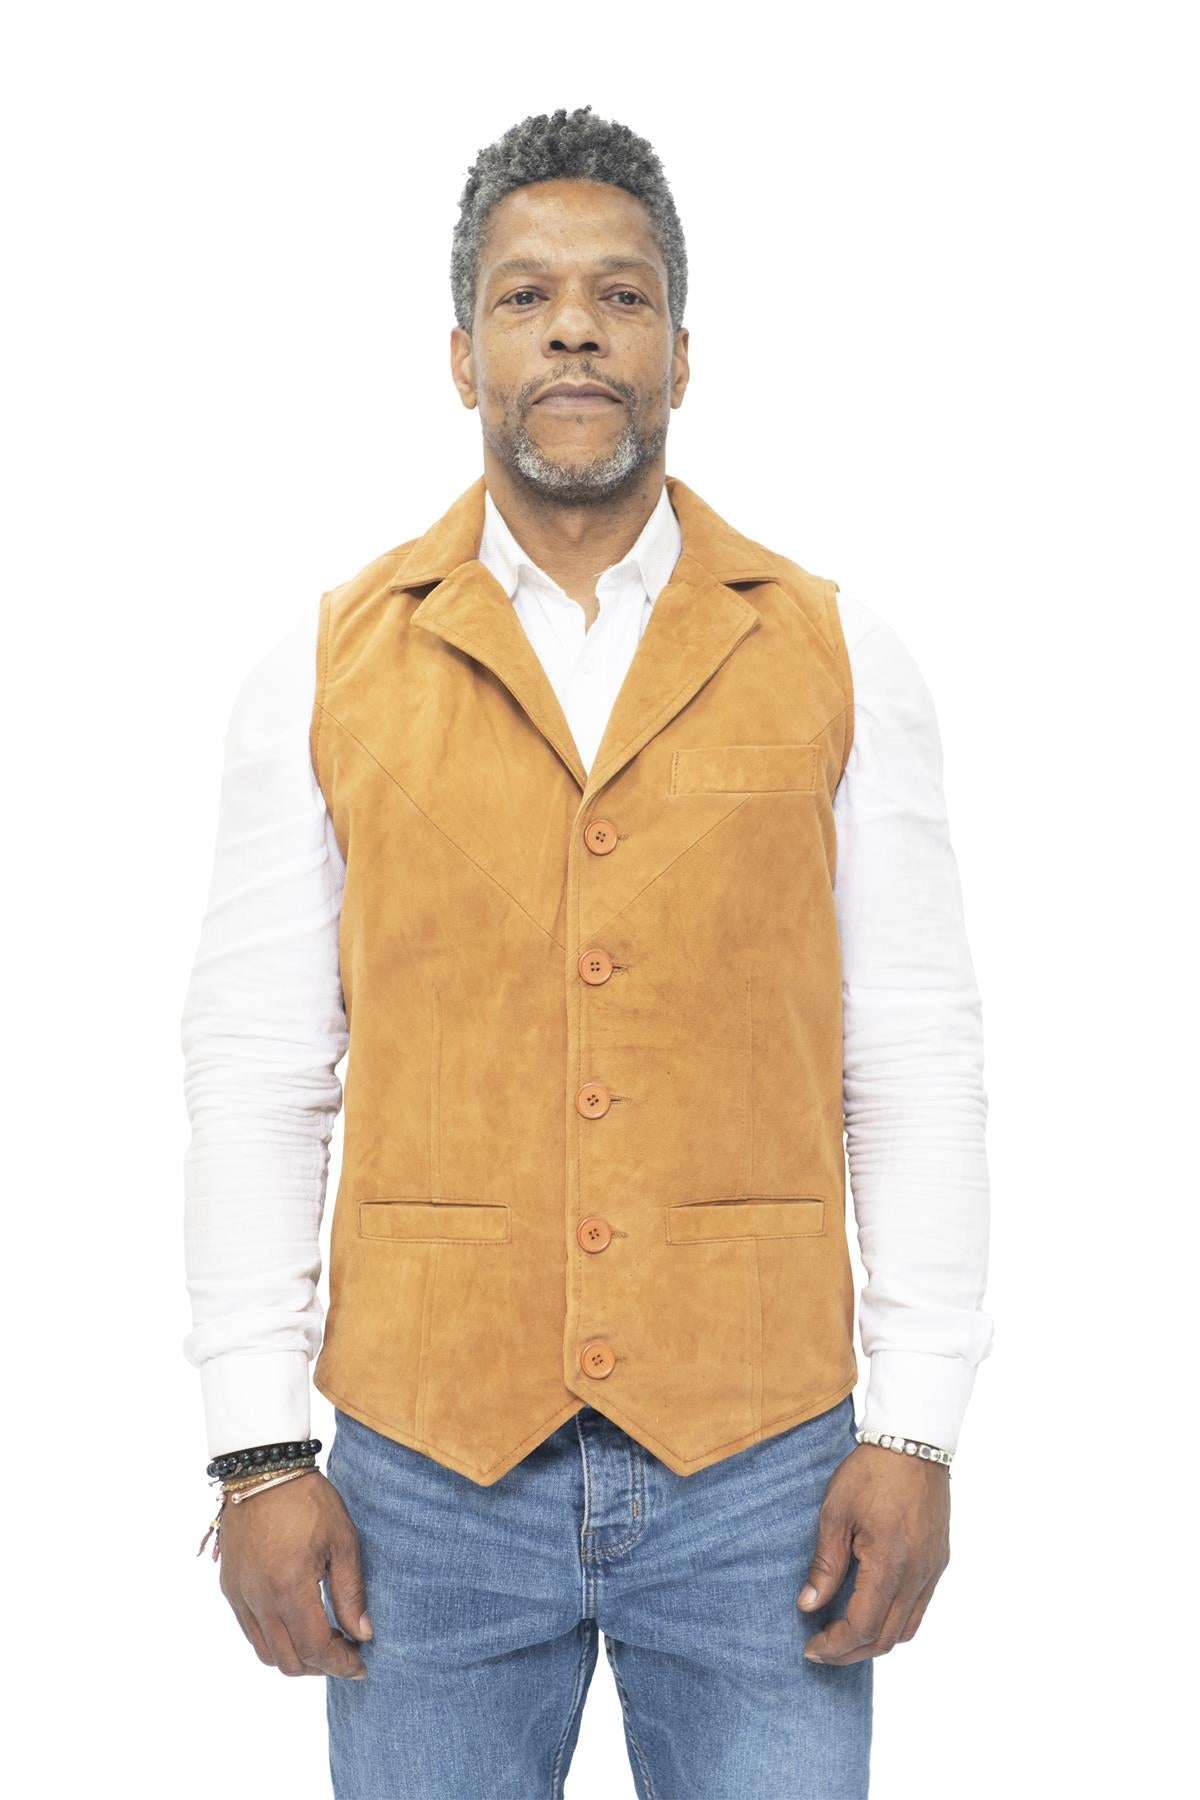 Mens Classic Smooth Goat Suede Leather Waistcoat-Exeter